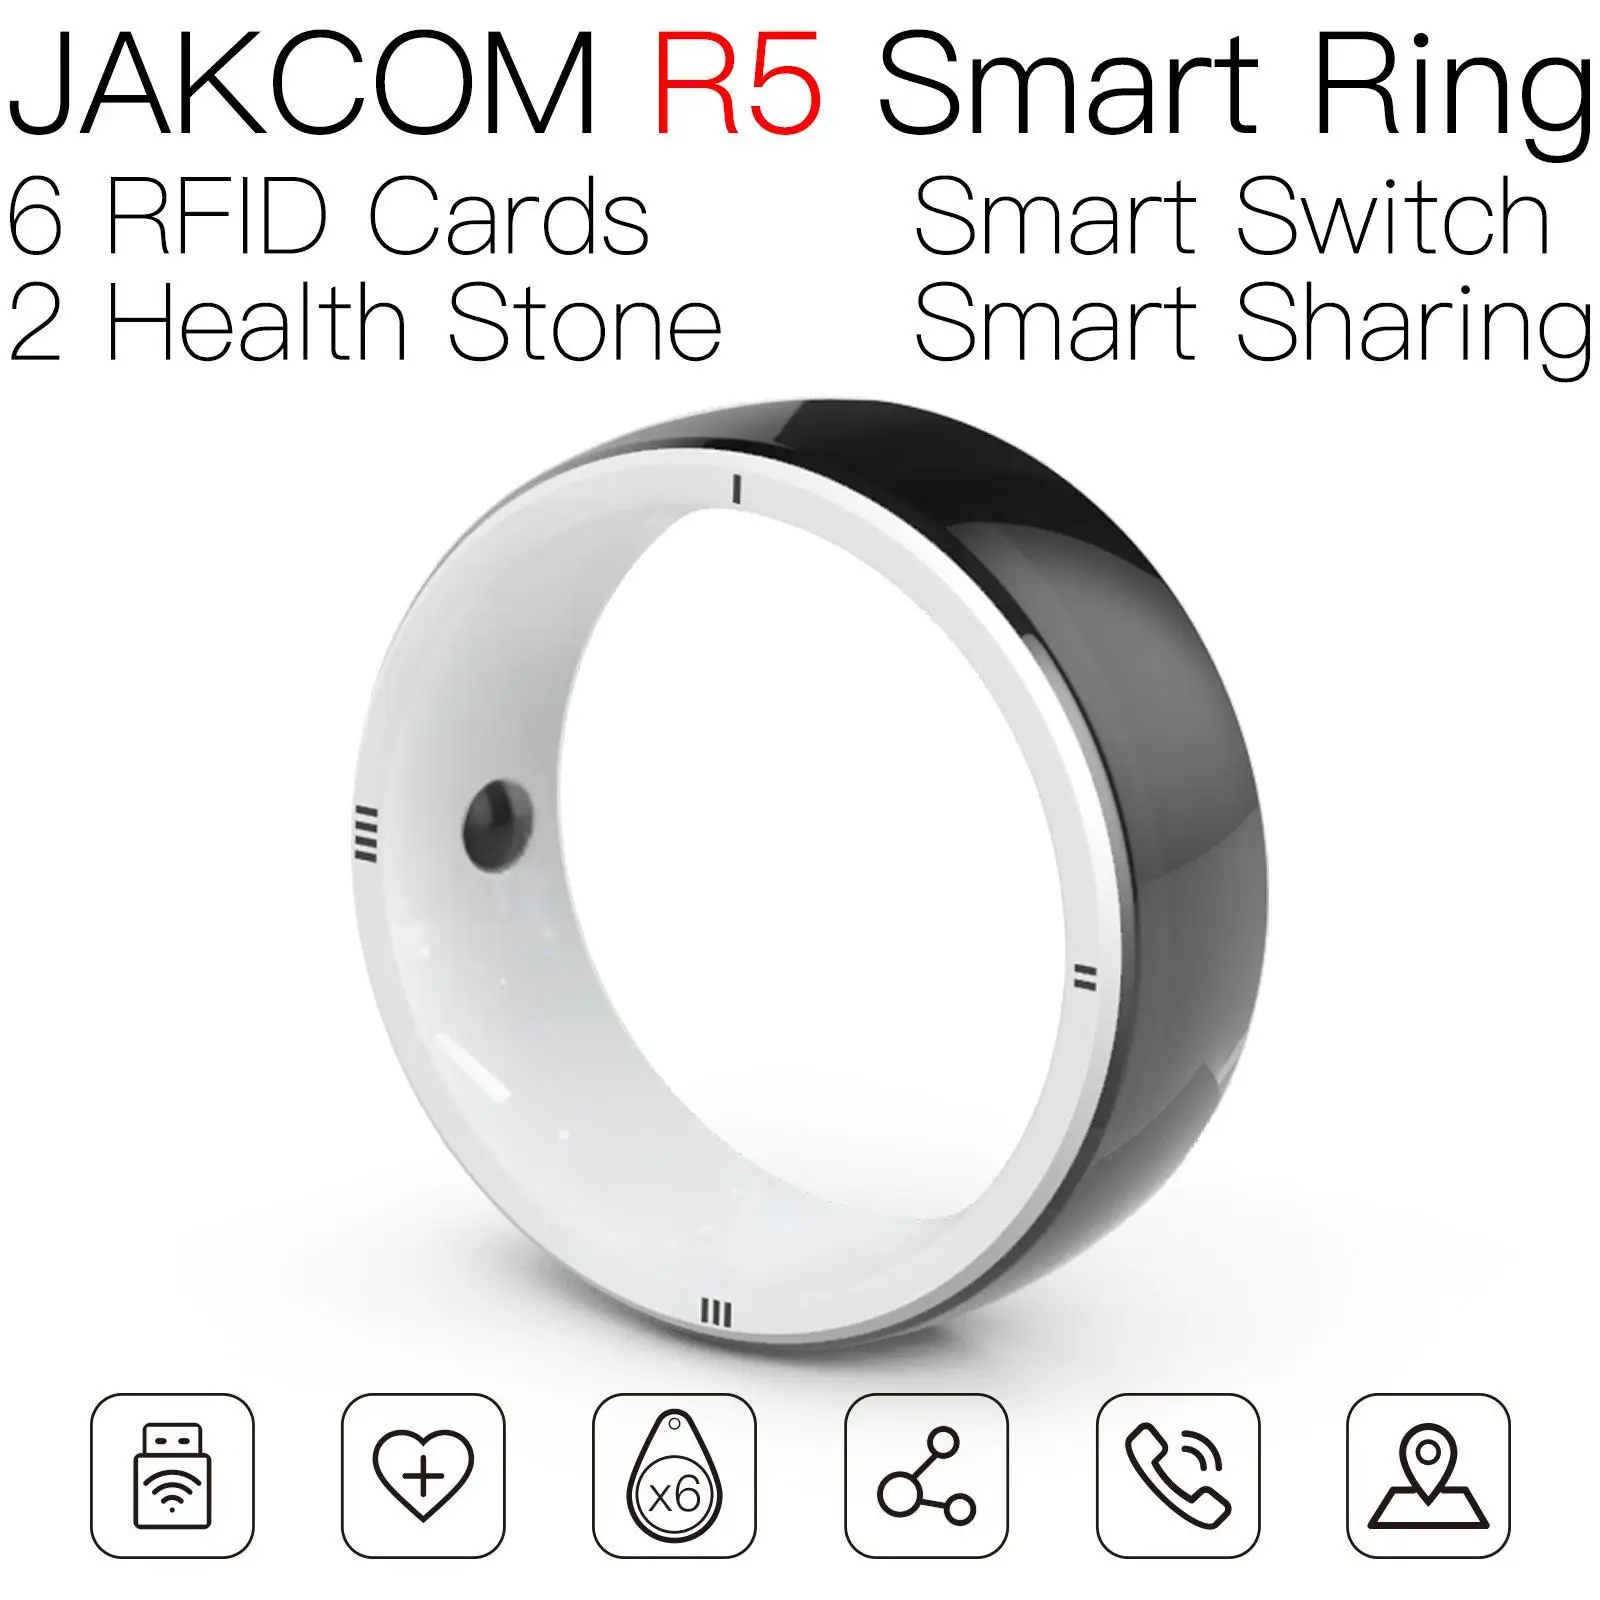 

JAKCOM R5 Smart Ring Super value as em marine clear nfc card smartwath with payment rfid rele long range tag 13 56 mhz writable